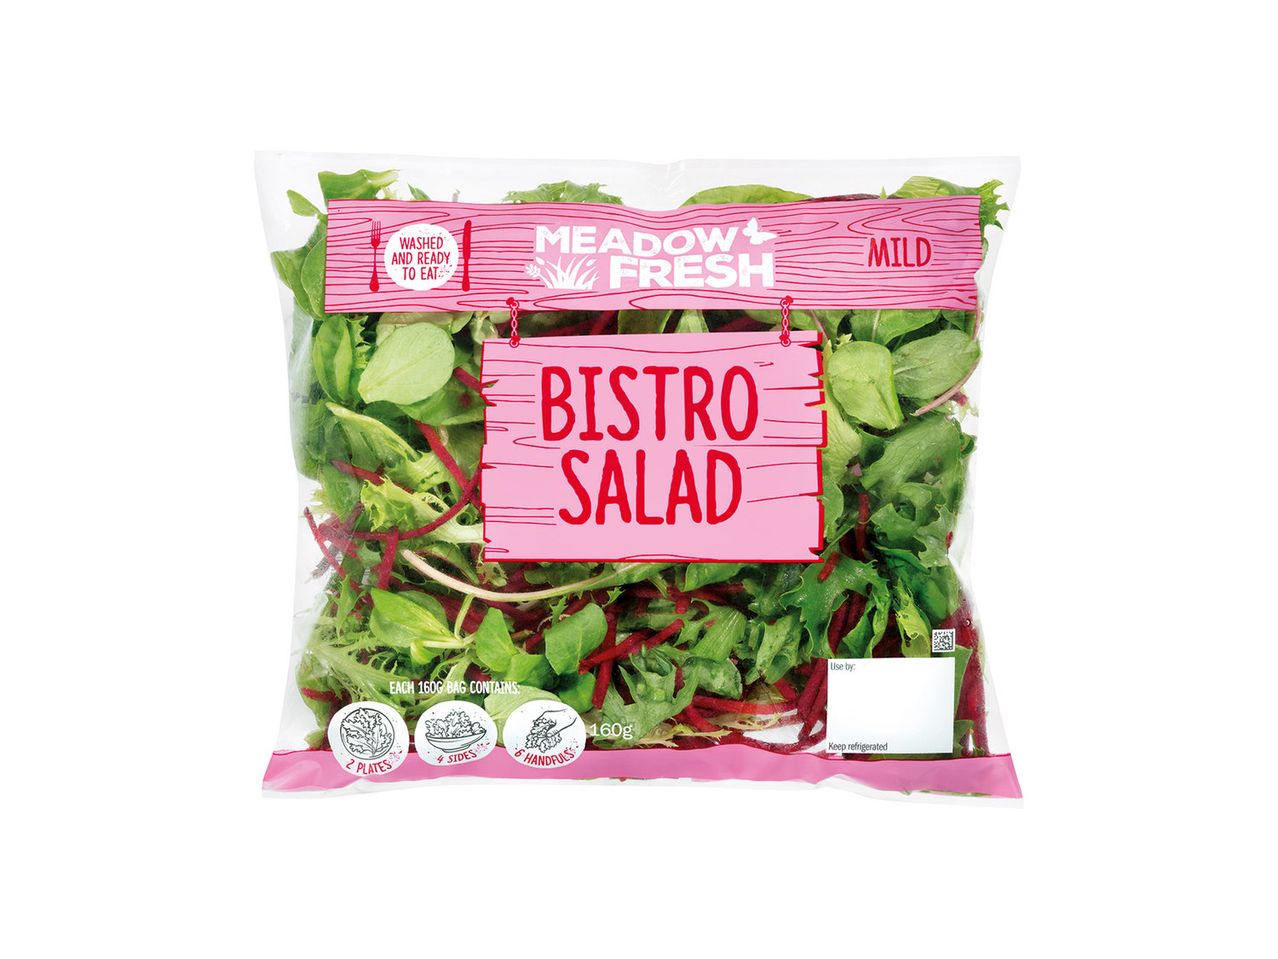 Go to full screen view: Meadow Fresh Bistro Salad - Image 1